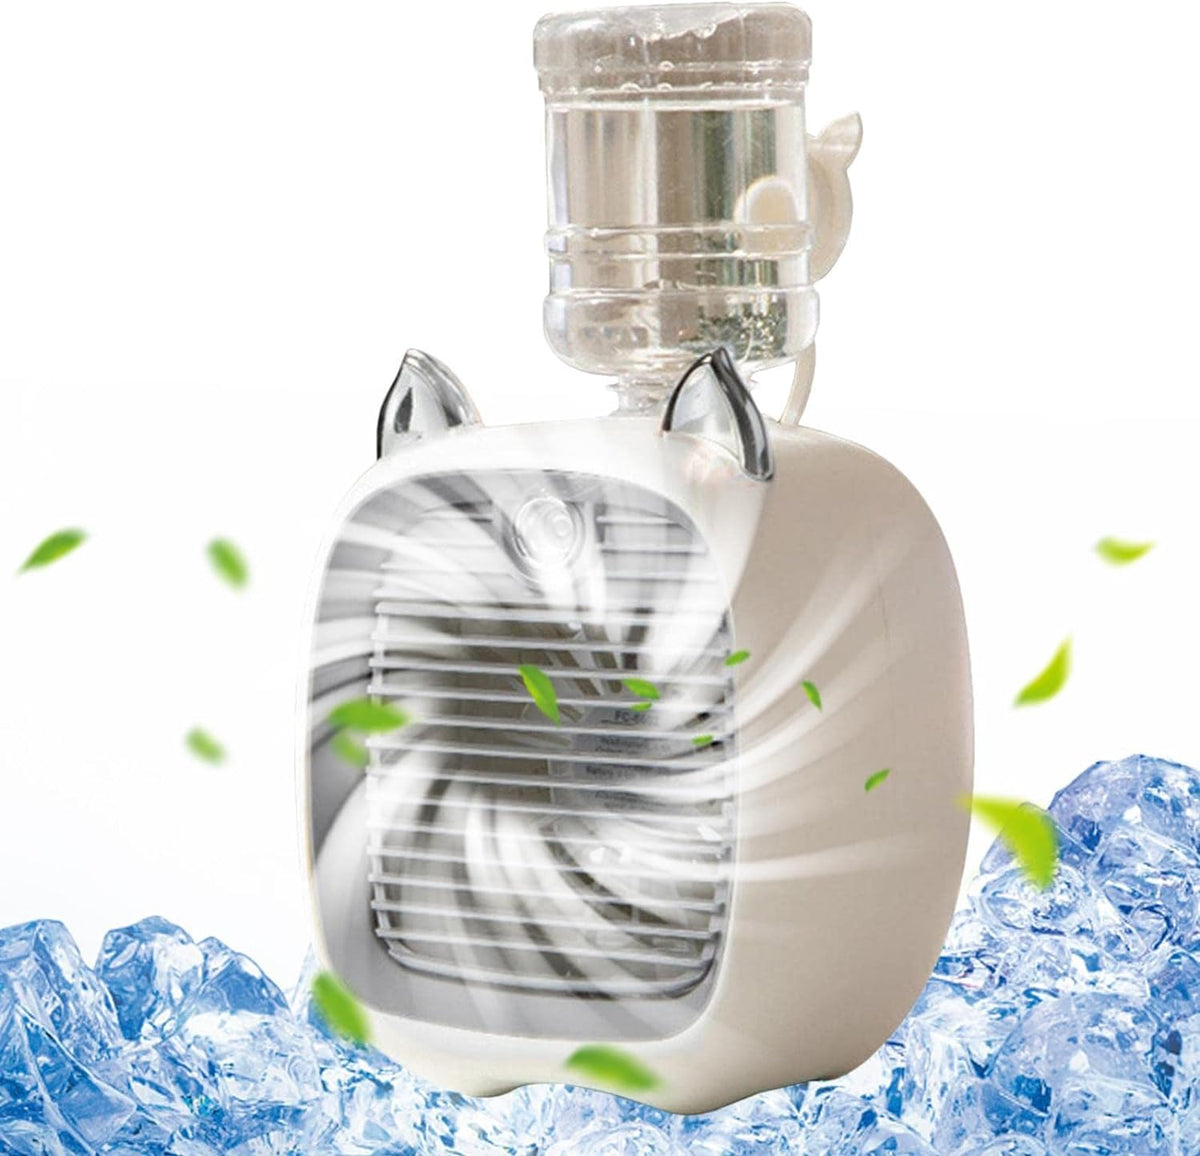 Mini Portable Mist Cooling Electric Fan: Rechargeable Evaporative Air Cooler & Humidifier for Home Bedroom